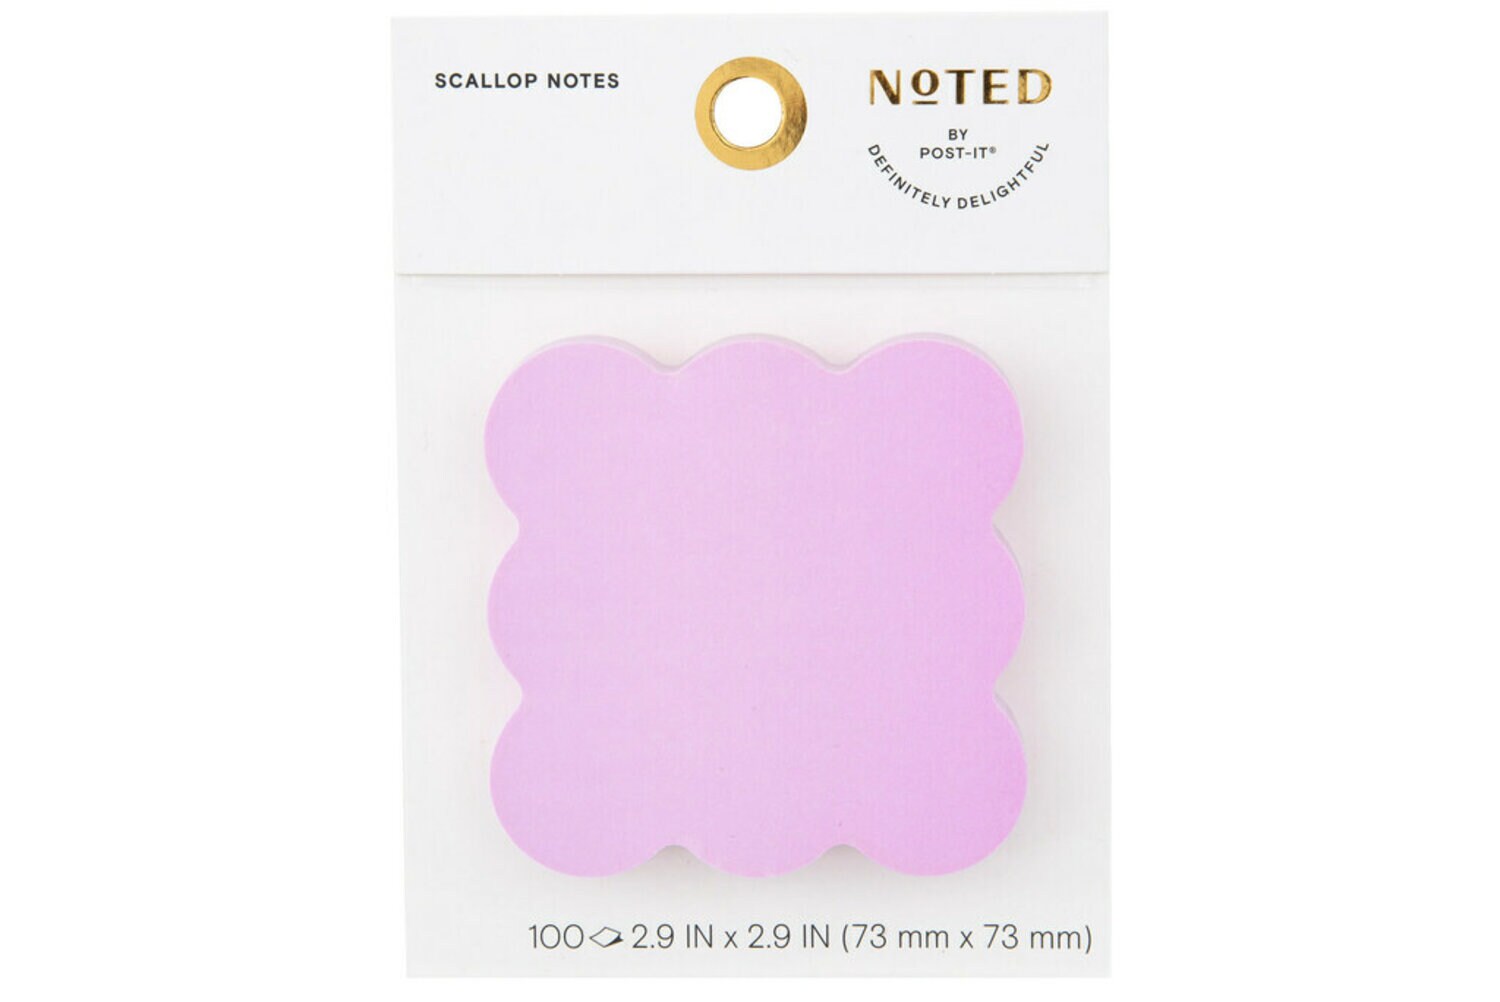 7100304097 - Post-it Square Scallop Notes NTD8-33-1, 2.9 in x 2.8 in (73 mm x 71 mm)